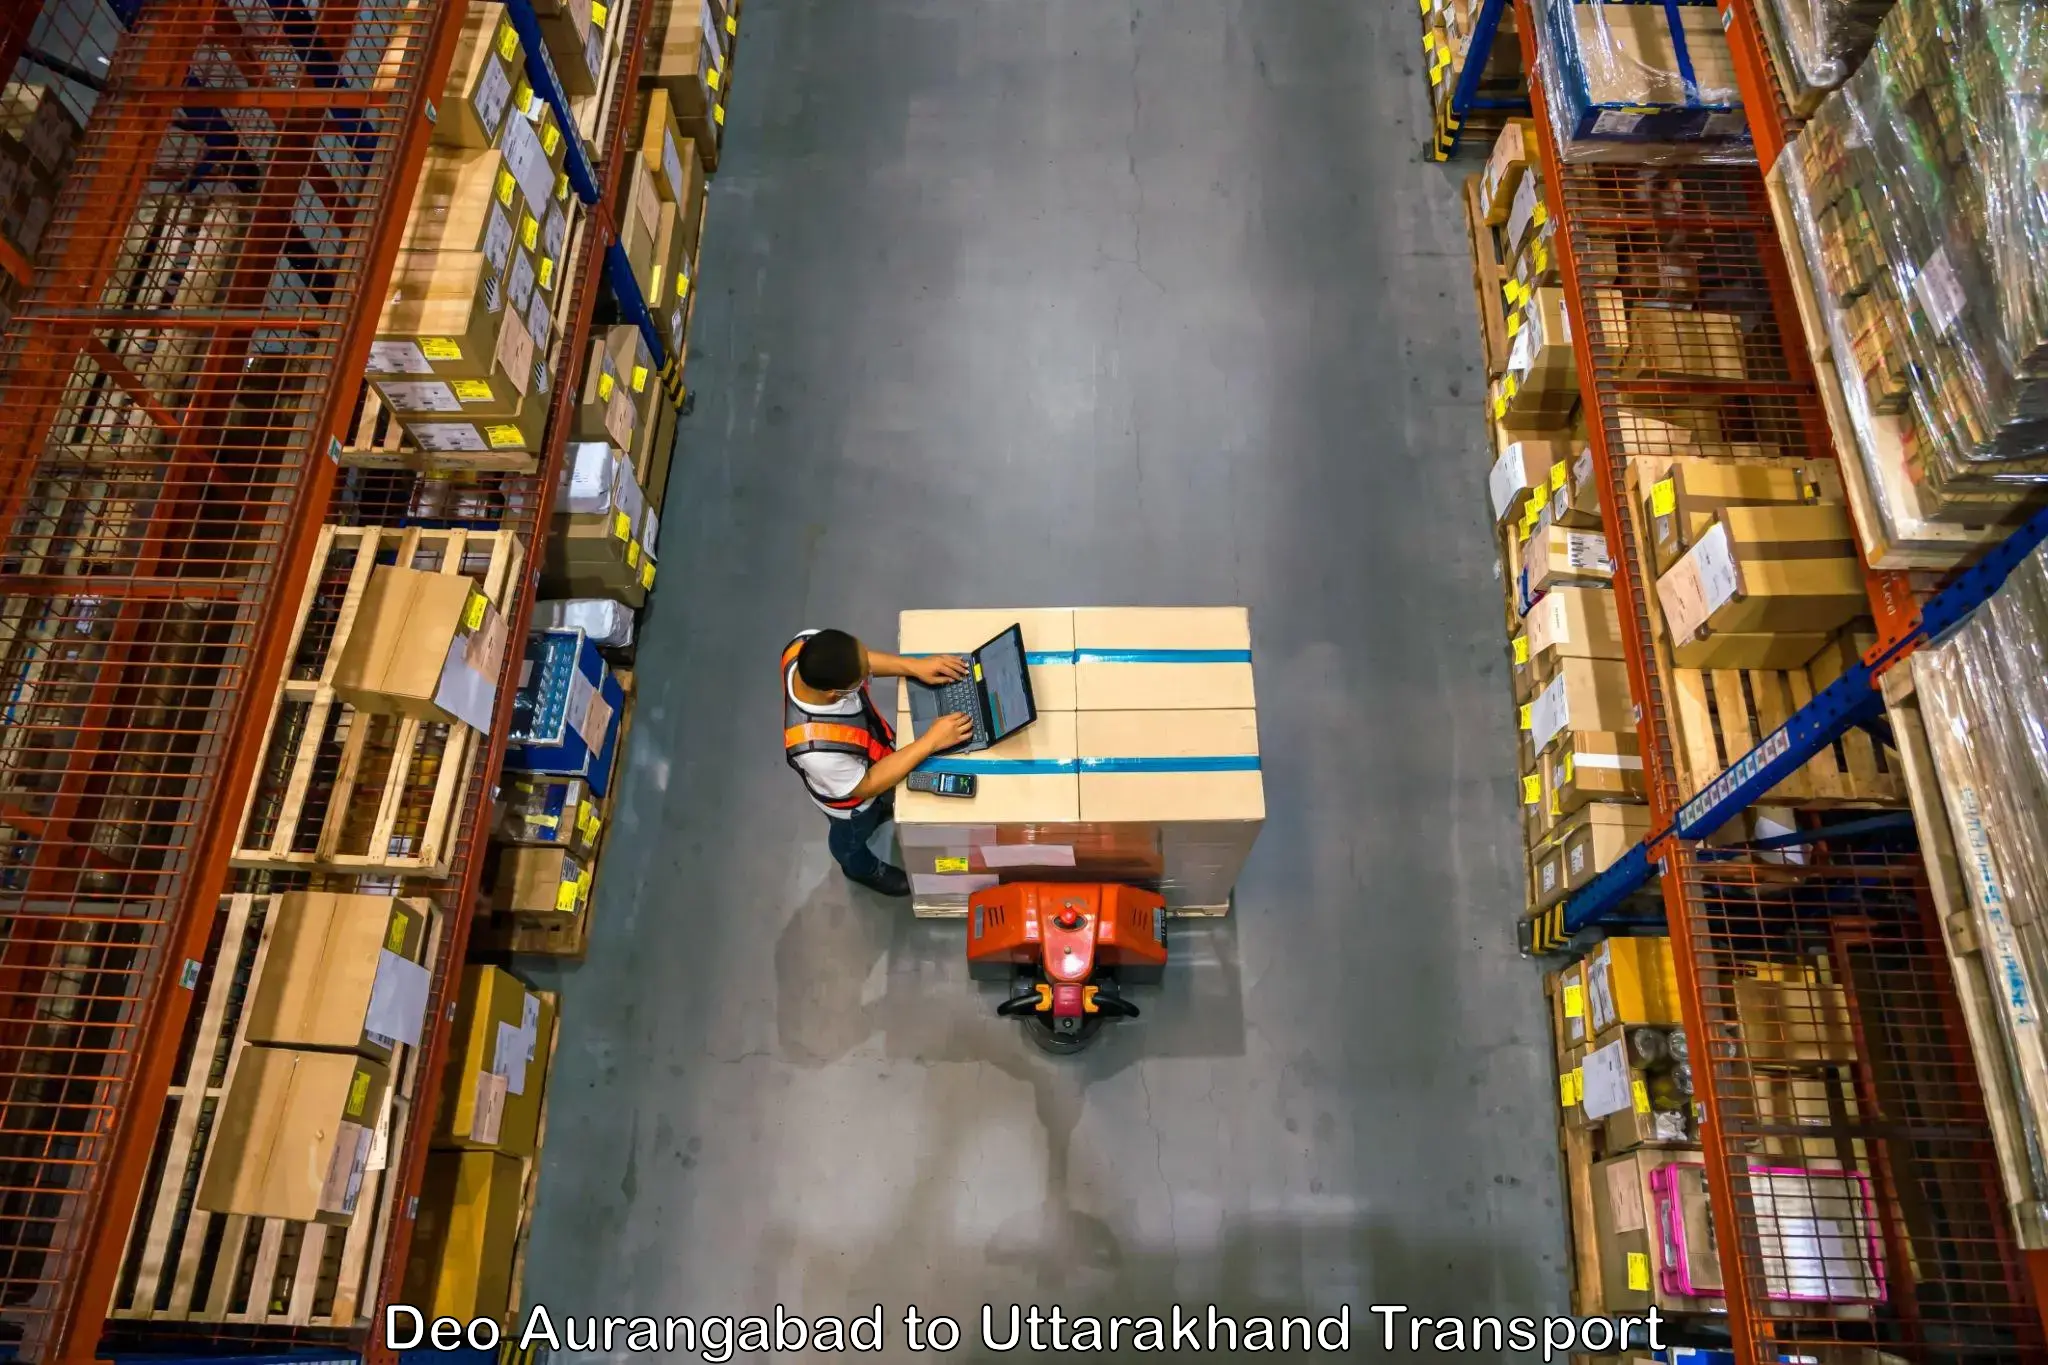 Truck transport companies in India Deo Aurangabad to Dwarahat